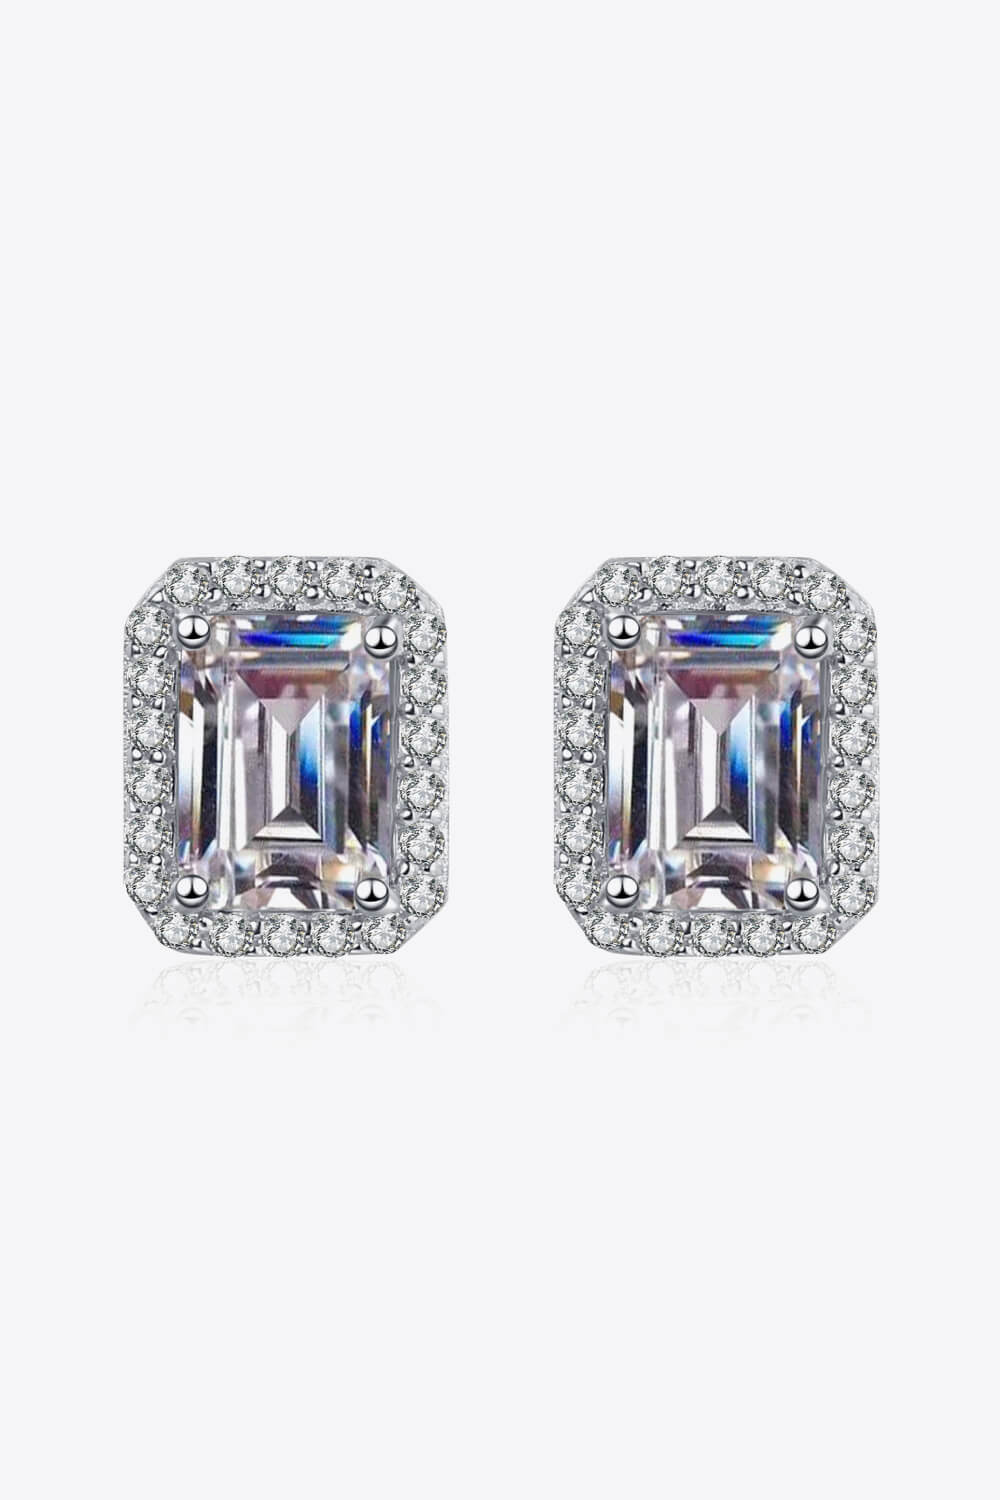 1 Carat Moissanite Rhodium-Plated Square Stud Earrings - Uylee's Boutique